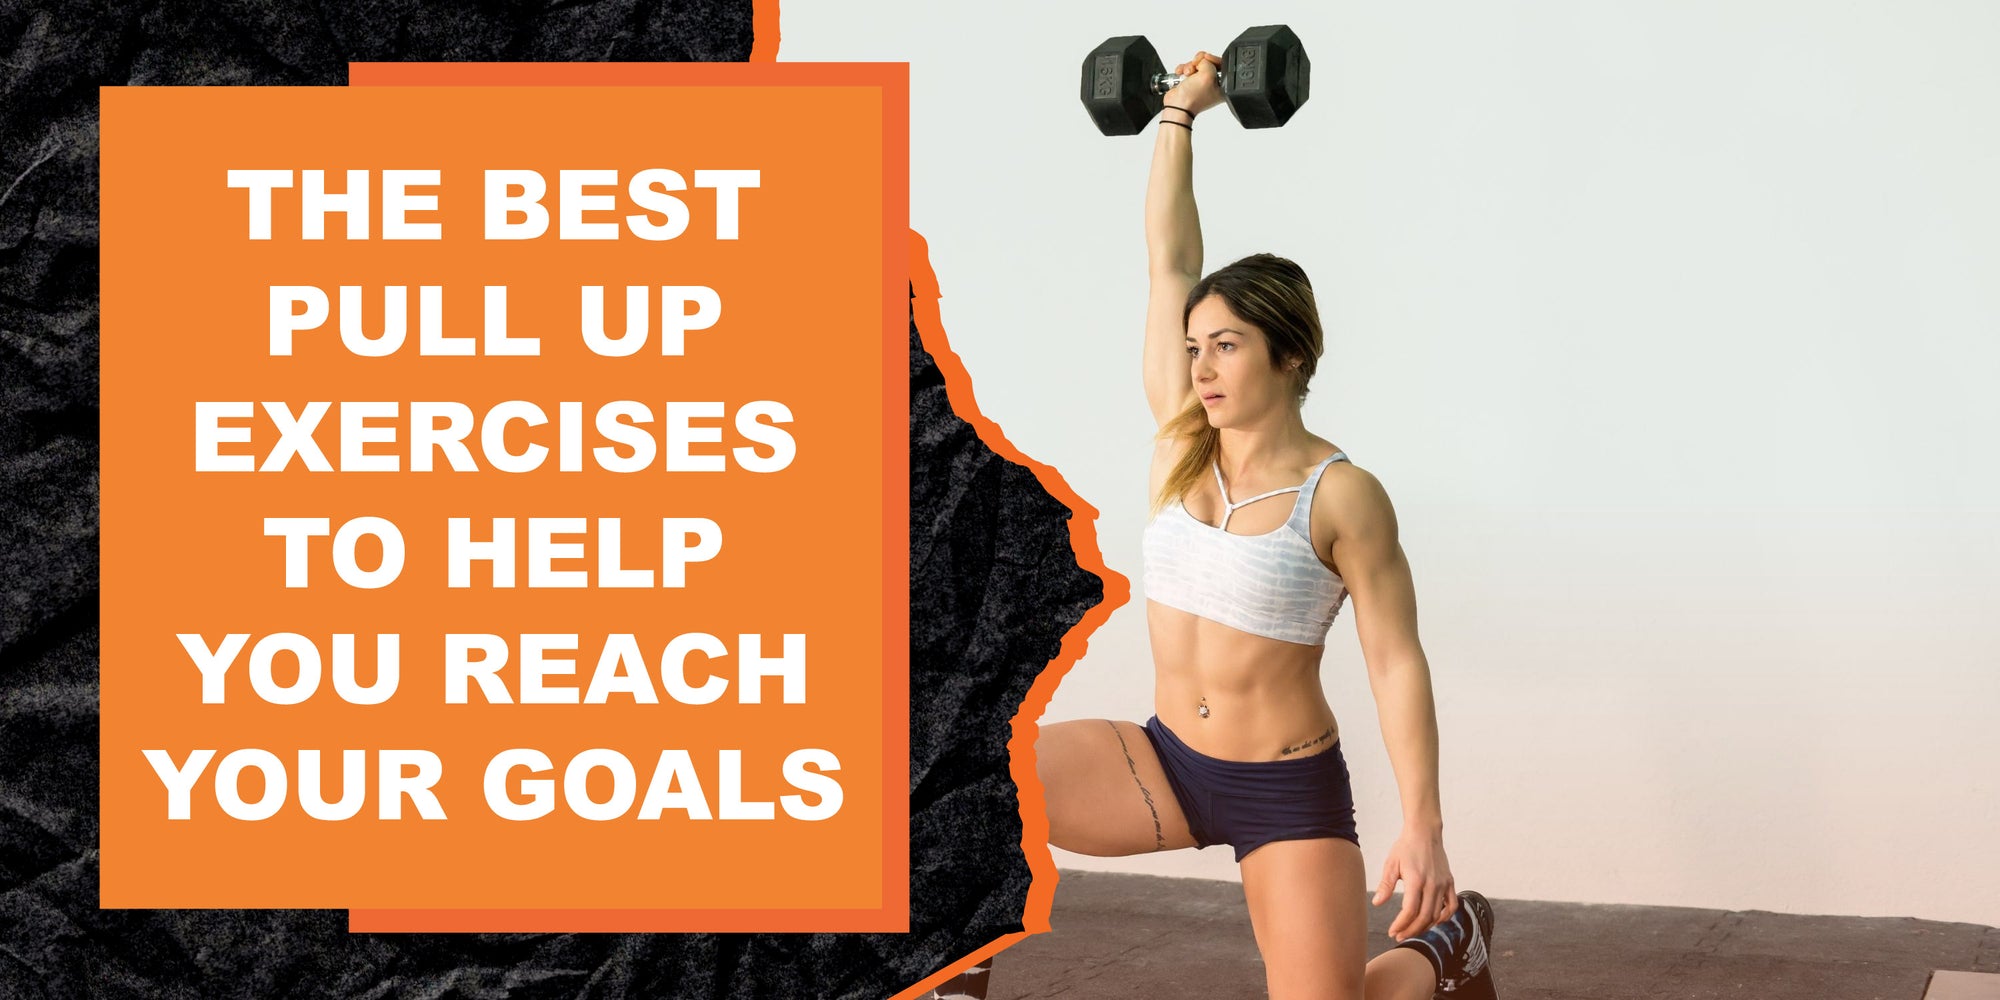 The Best Pull Up Exercises to Help You Reach Your Goals